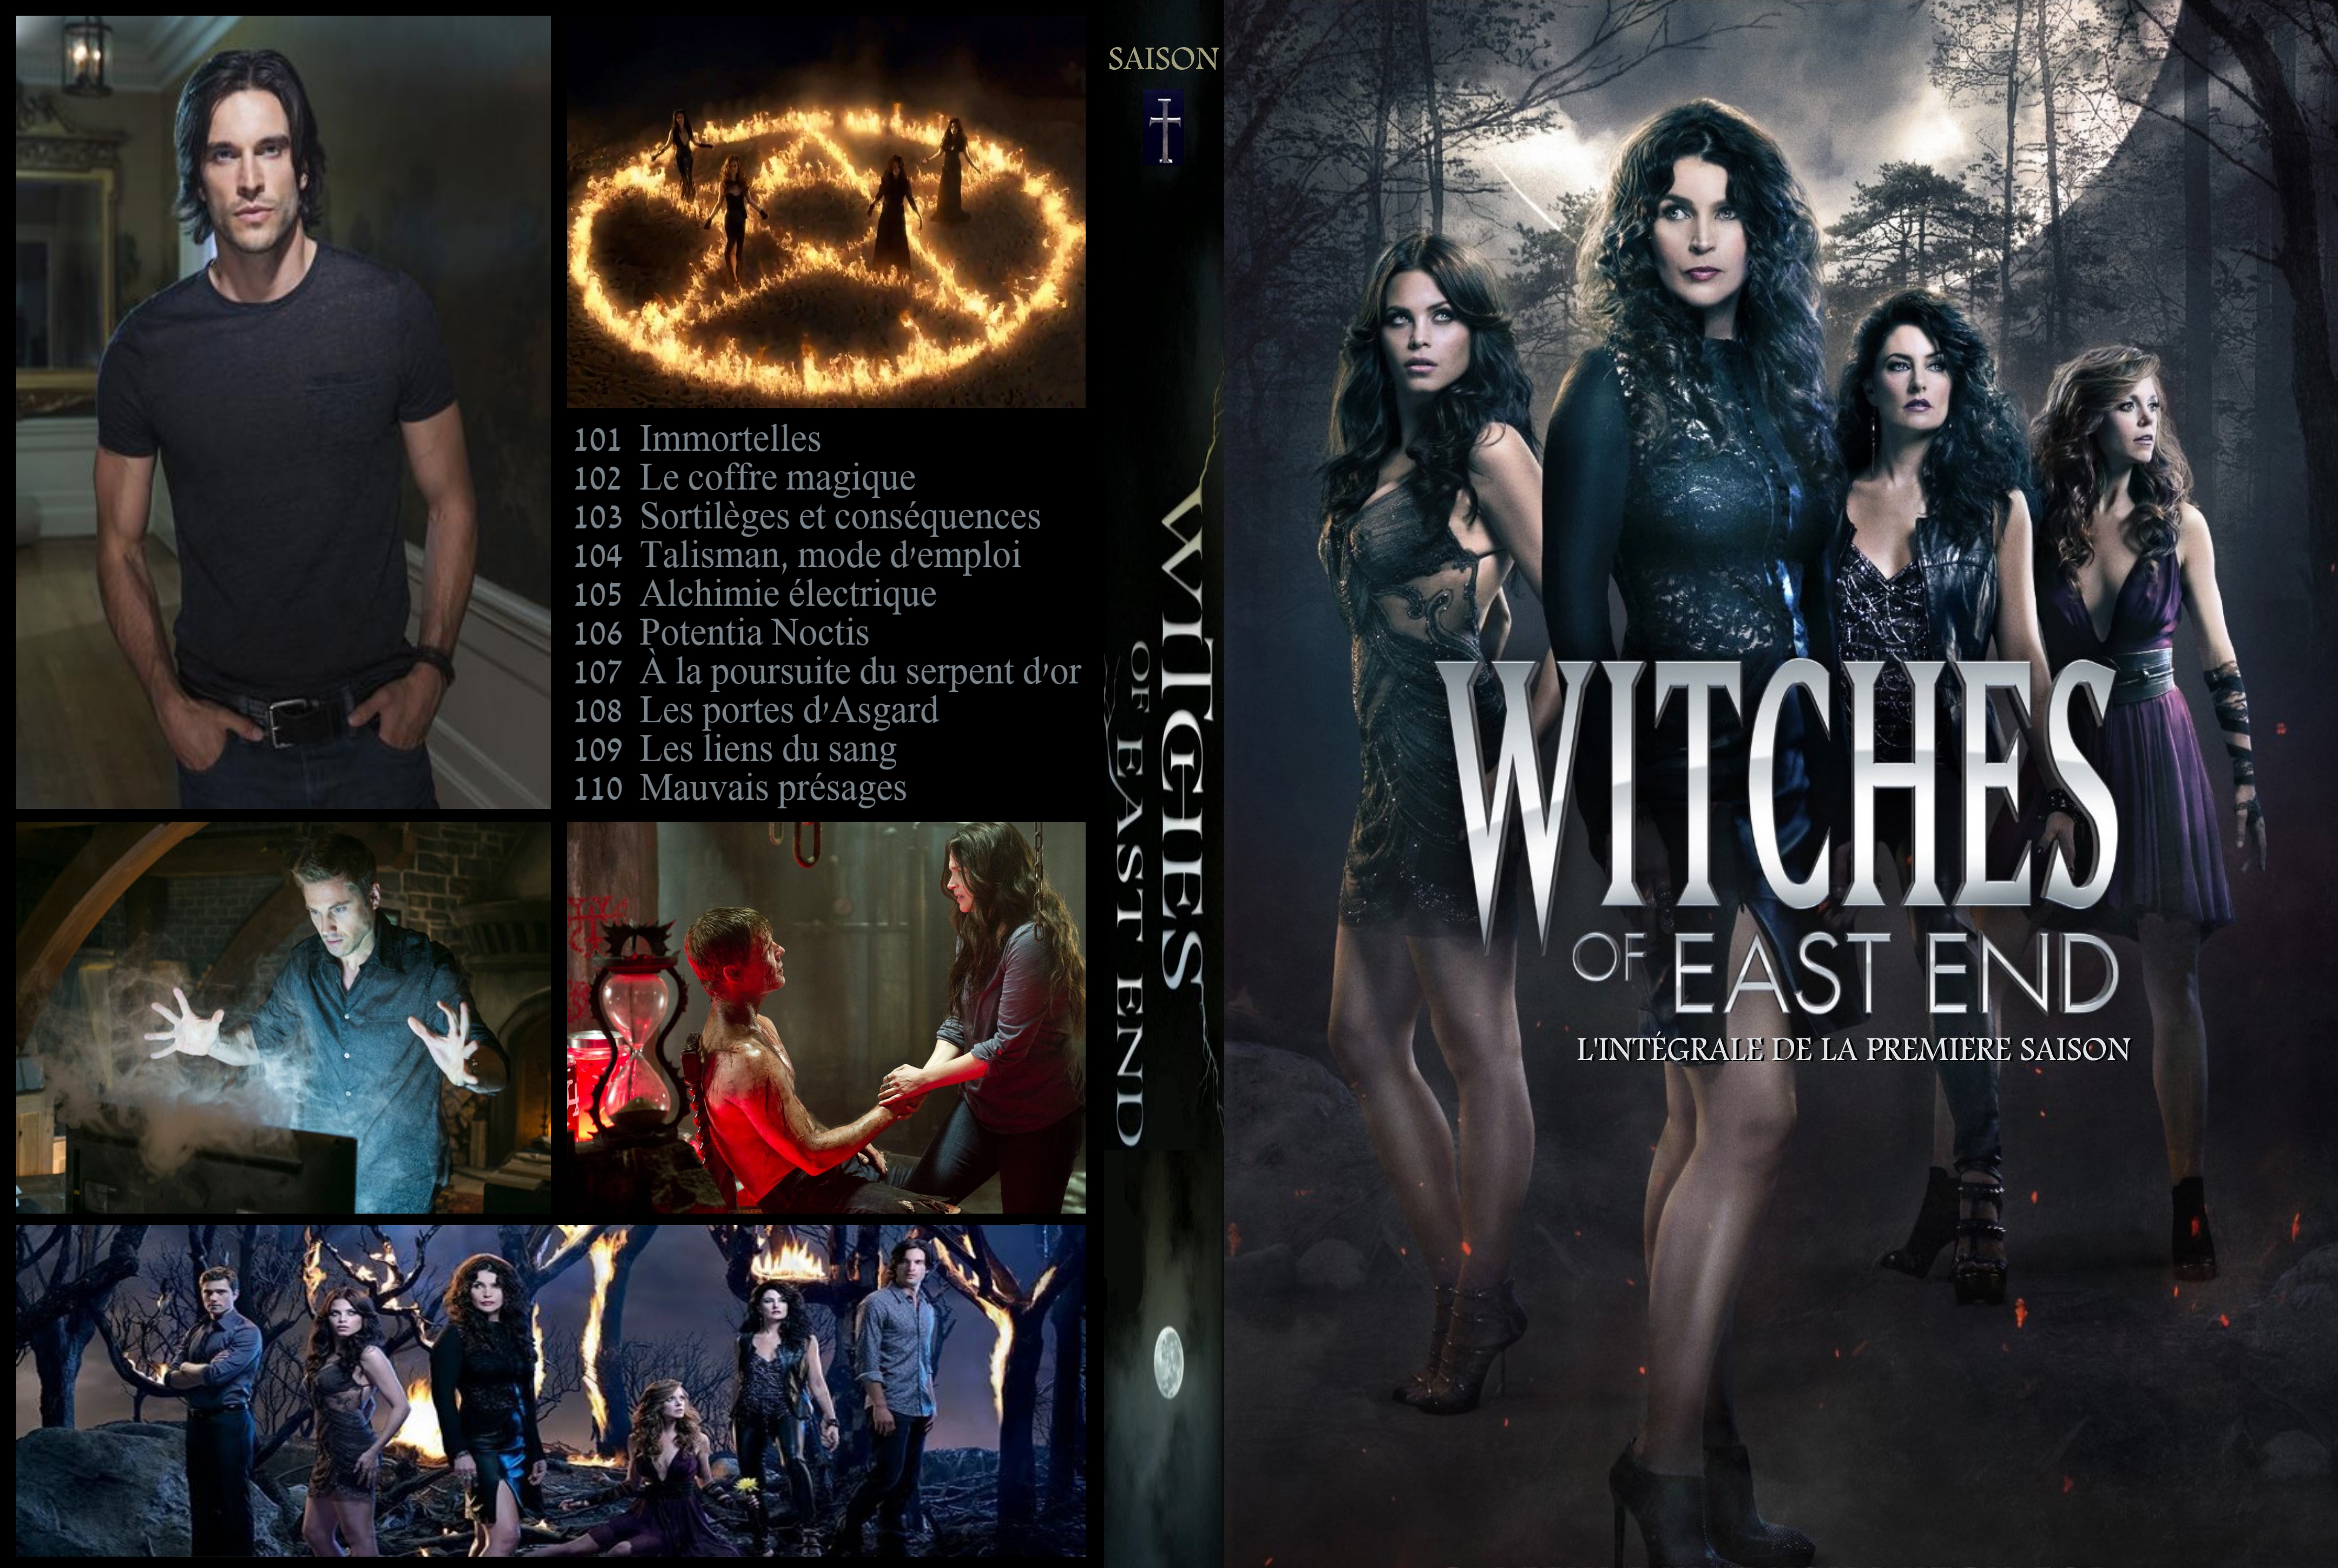 Jaquette DVD Witches of East End saison 1 custom